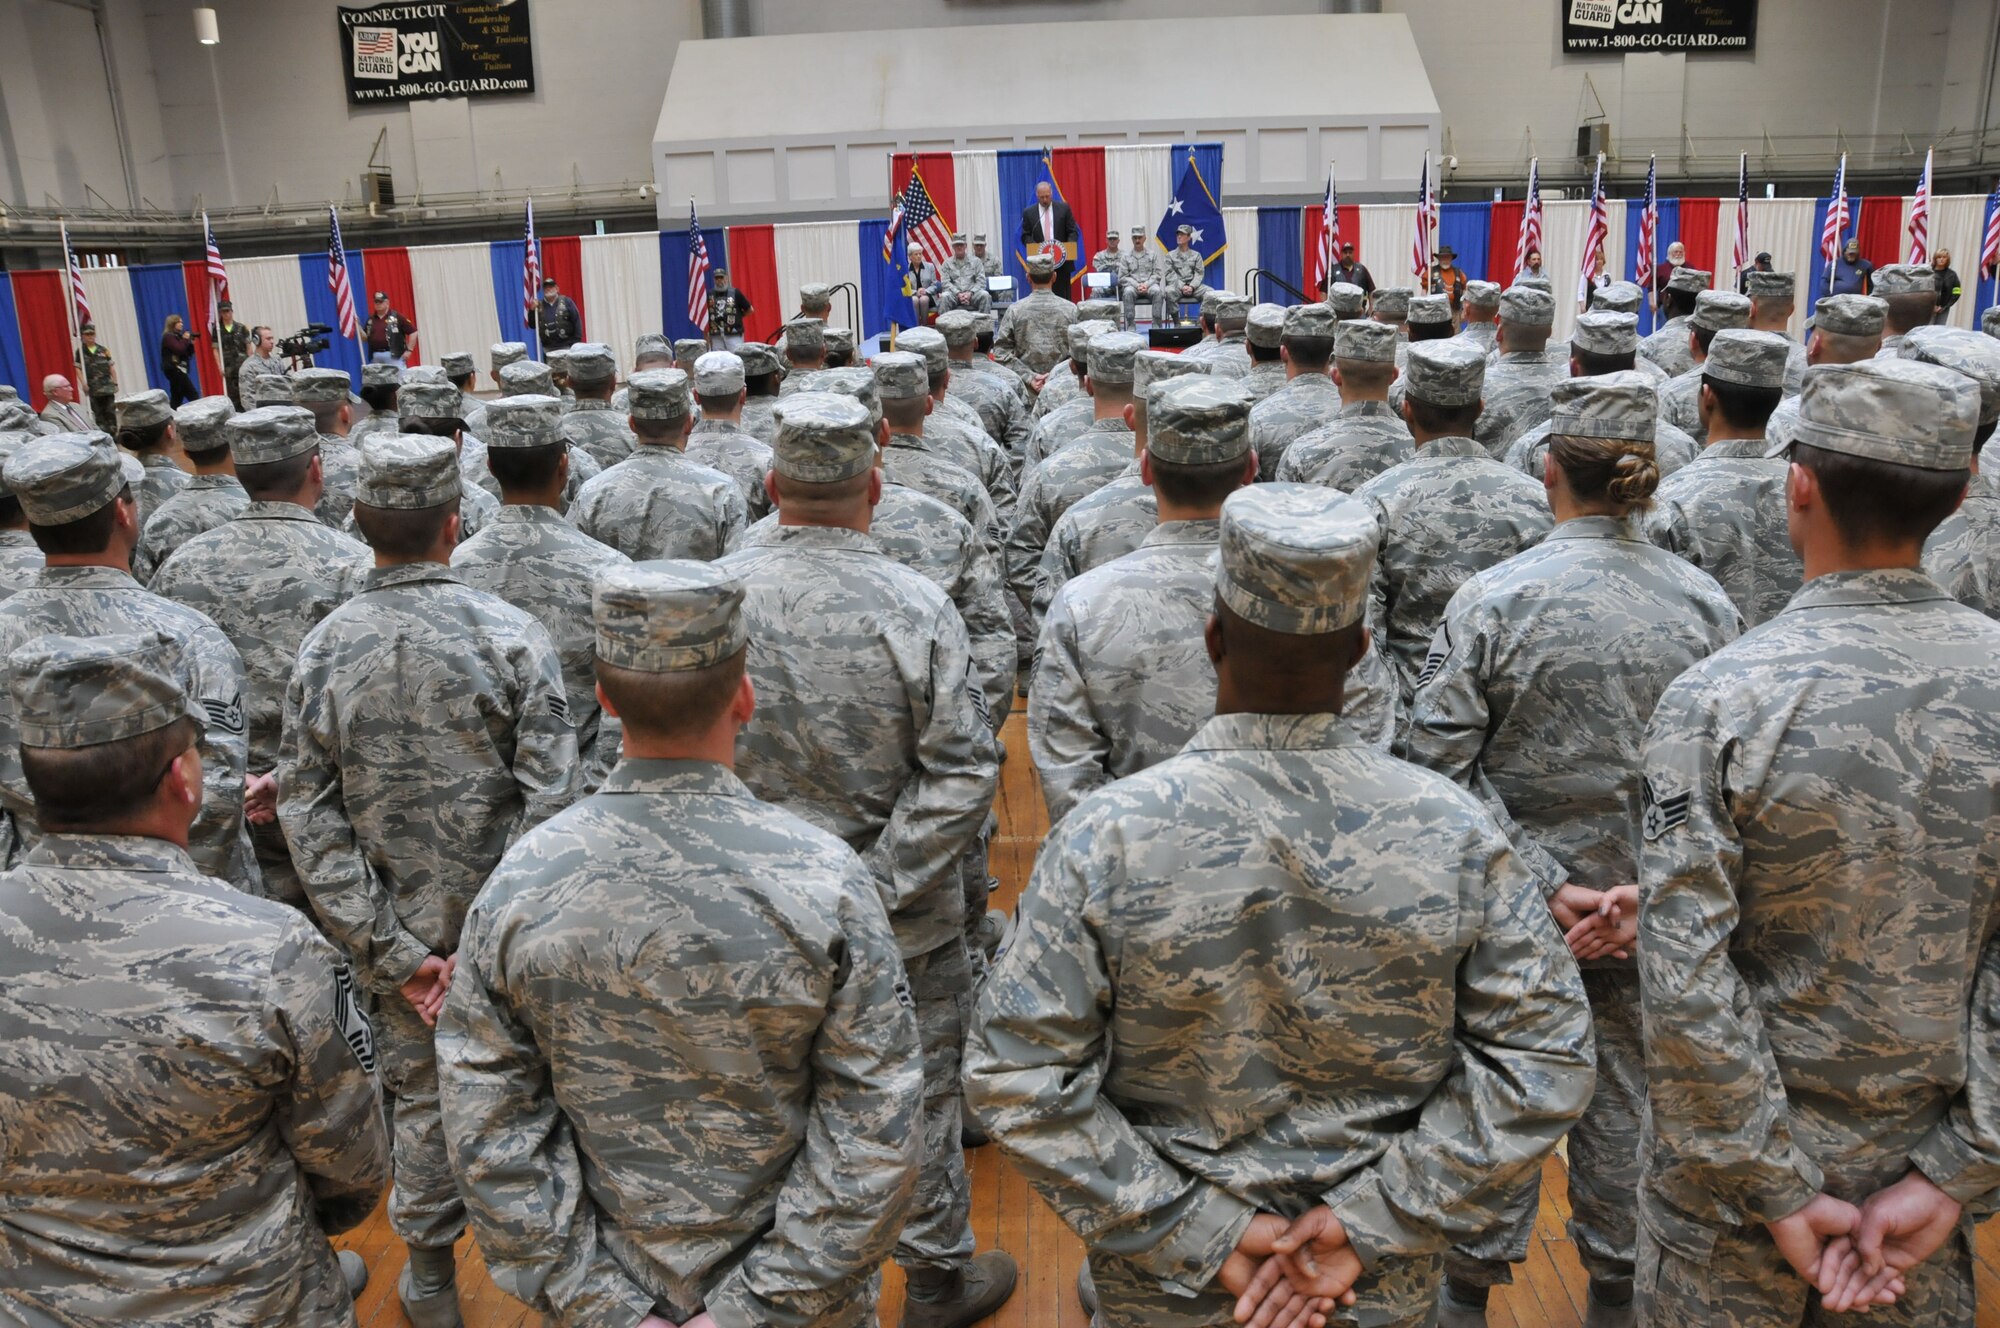 Airmen with the 103rd Air Control Squadron based in Orange, Conn., stand in formation during a formal send-off ceremony held at the William A. O’Neill Armory in Hartford April 25, 2012. The Air National Guard unit has been mobilized and will deploy to Southwest Asia in support of Operation Enduring Freedom. (U.S. Air Force photo by Tech. Sgt. Erin McNamara\RELEASED)